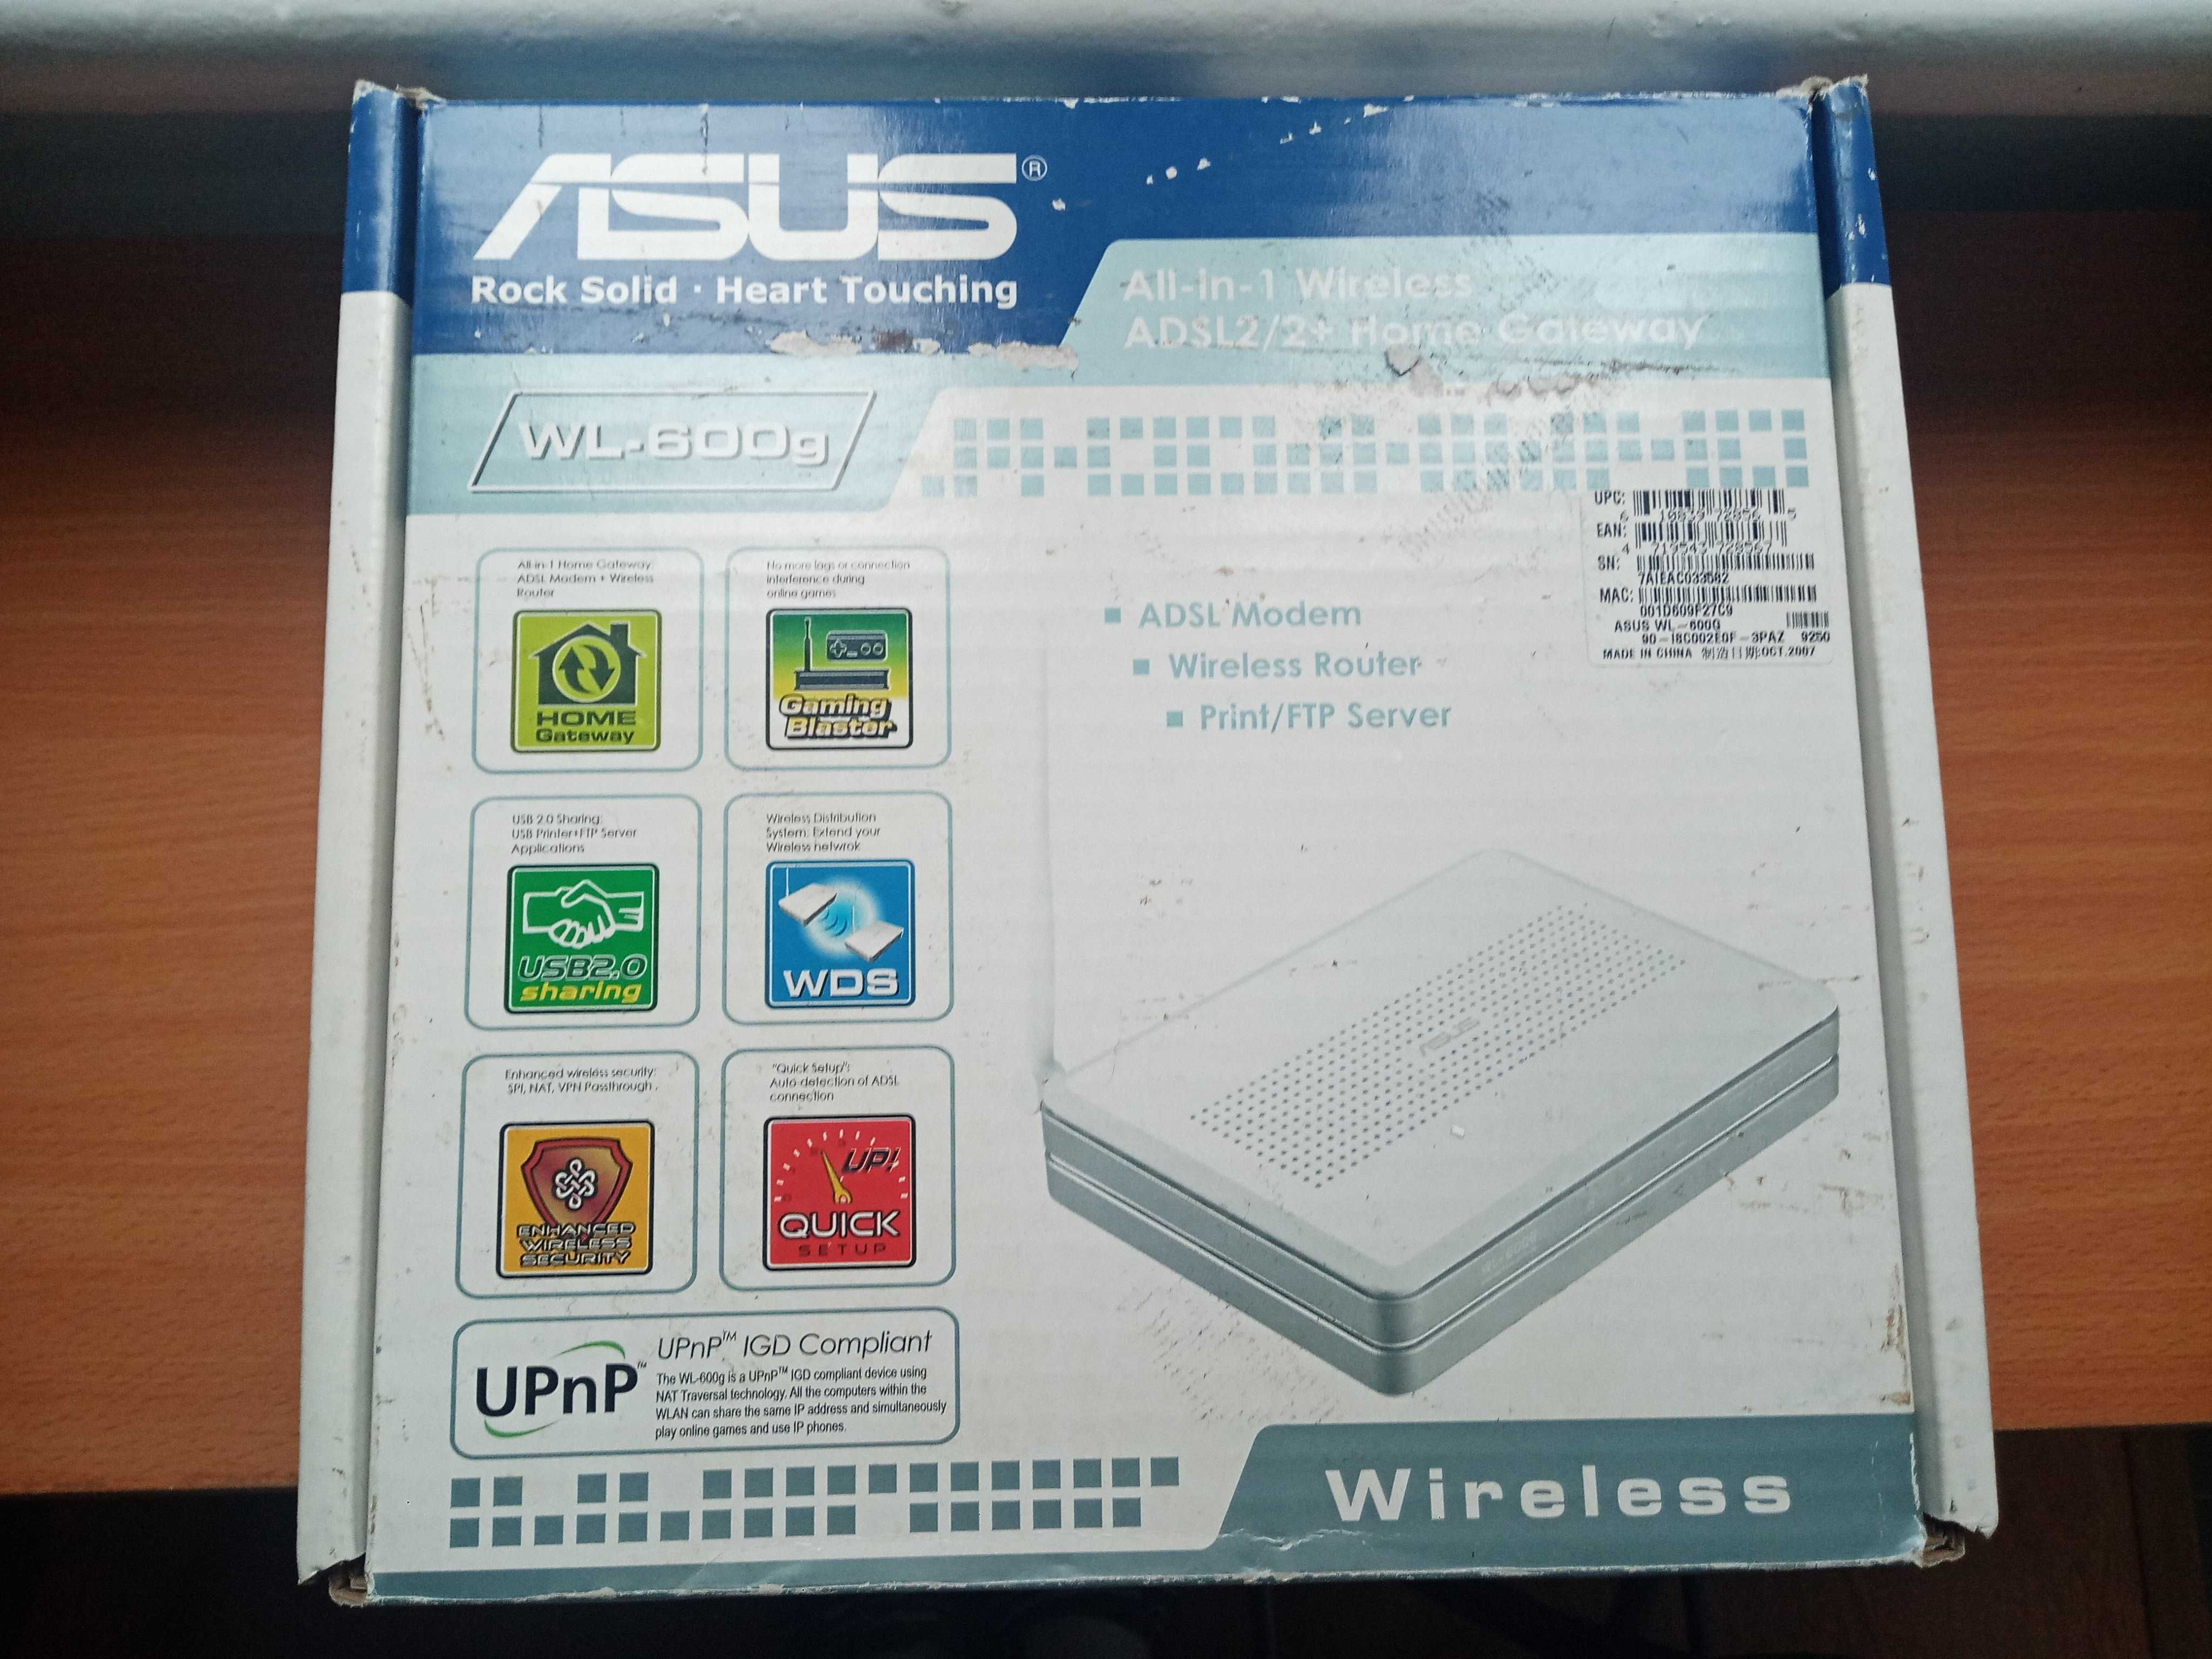 Router Asus WL-600g